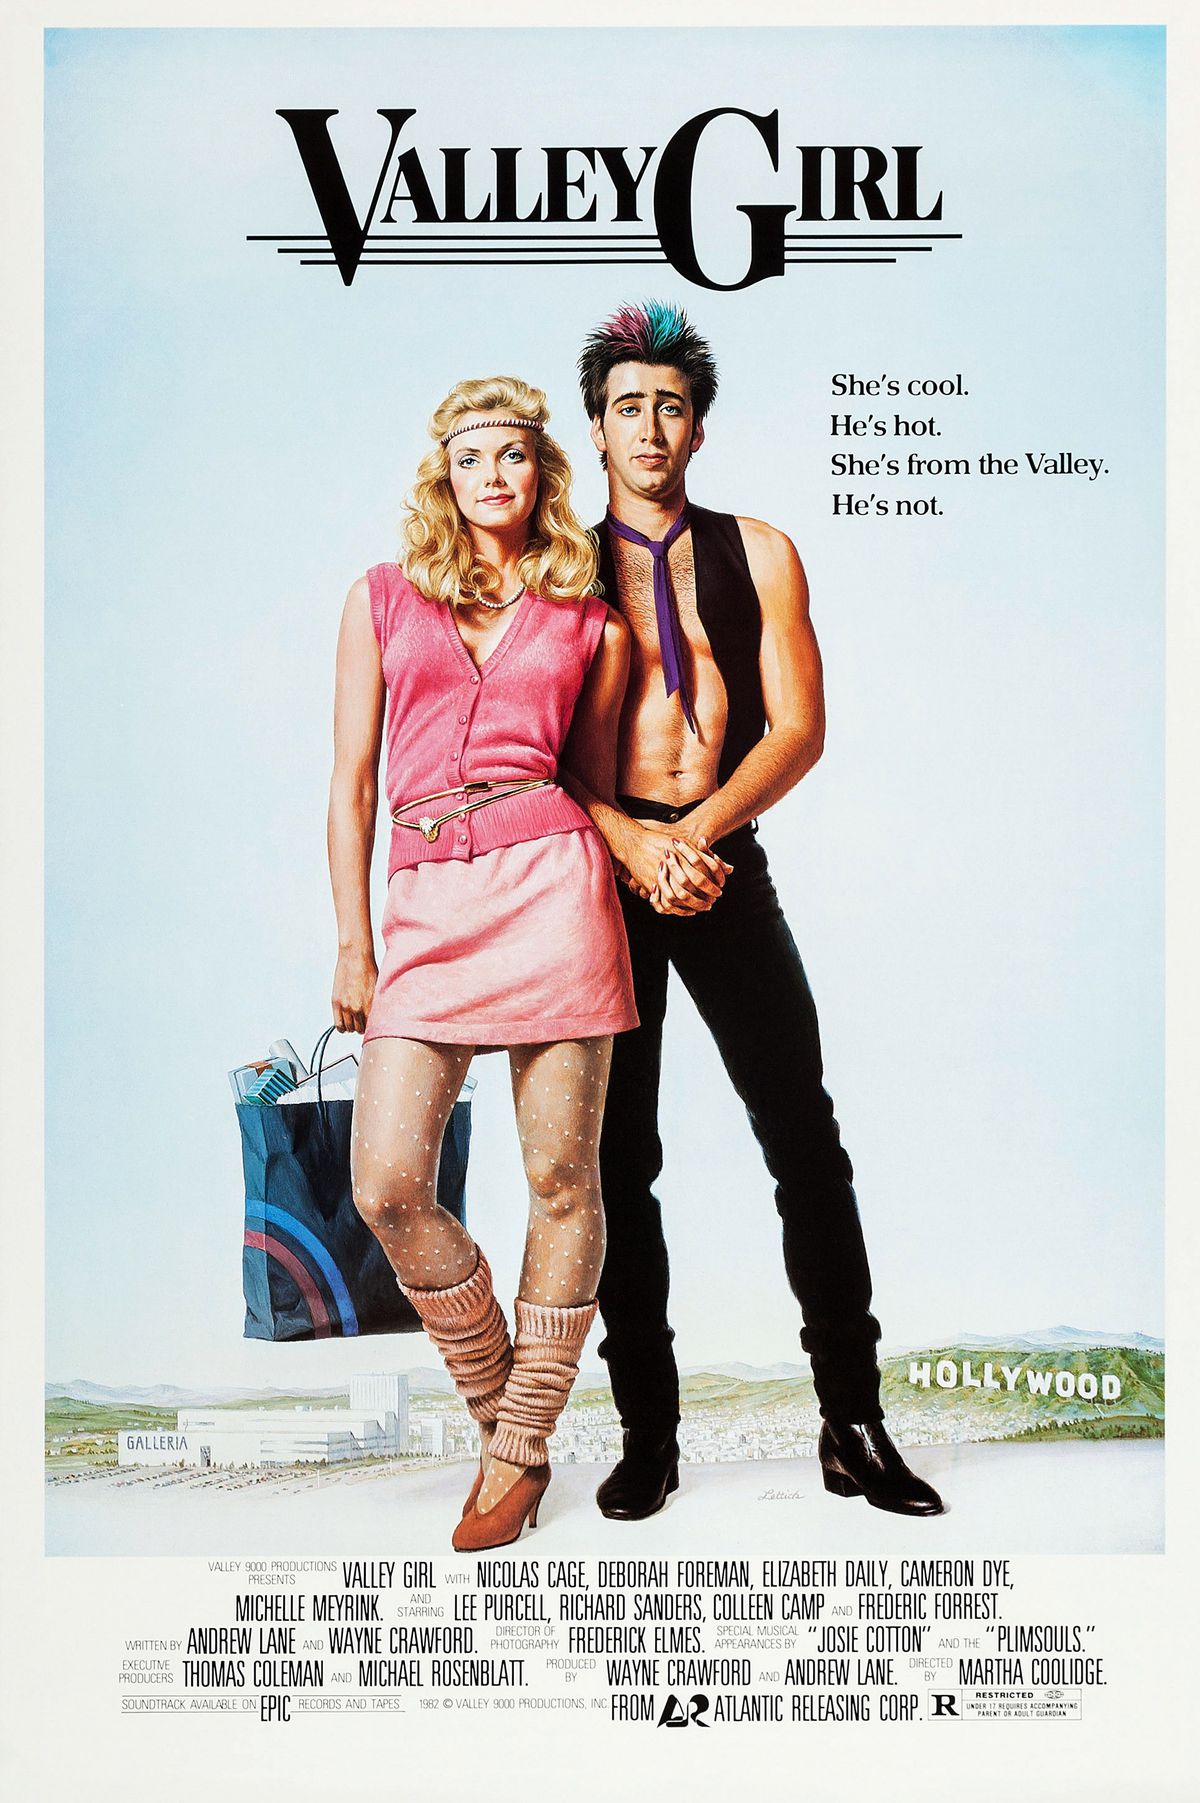 The original movie poster from Valley Girl.